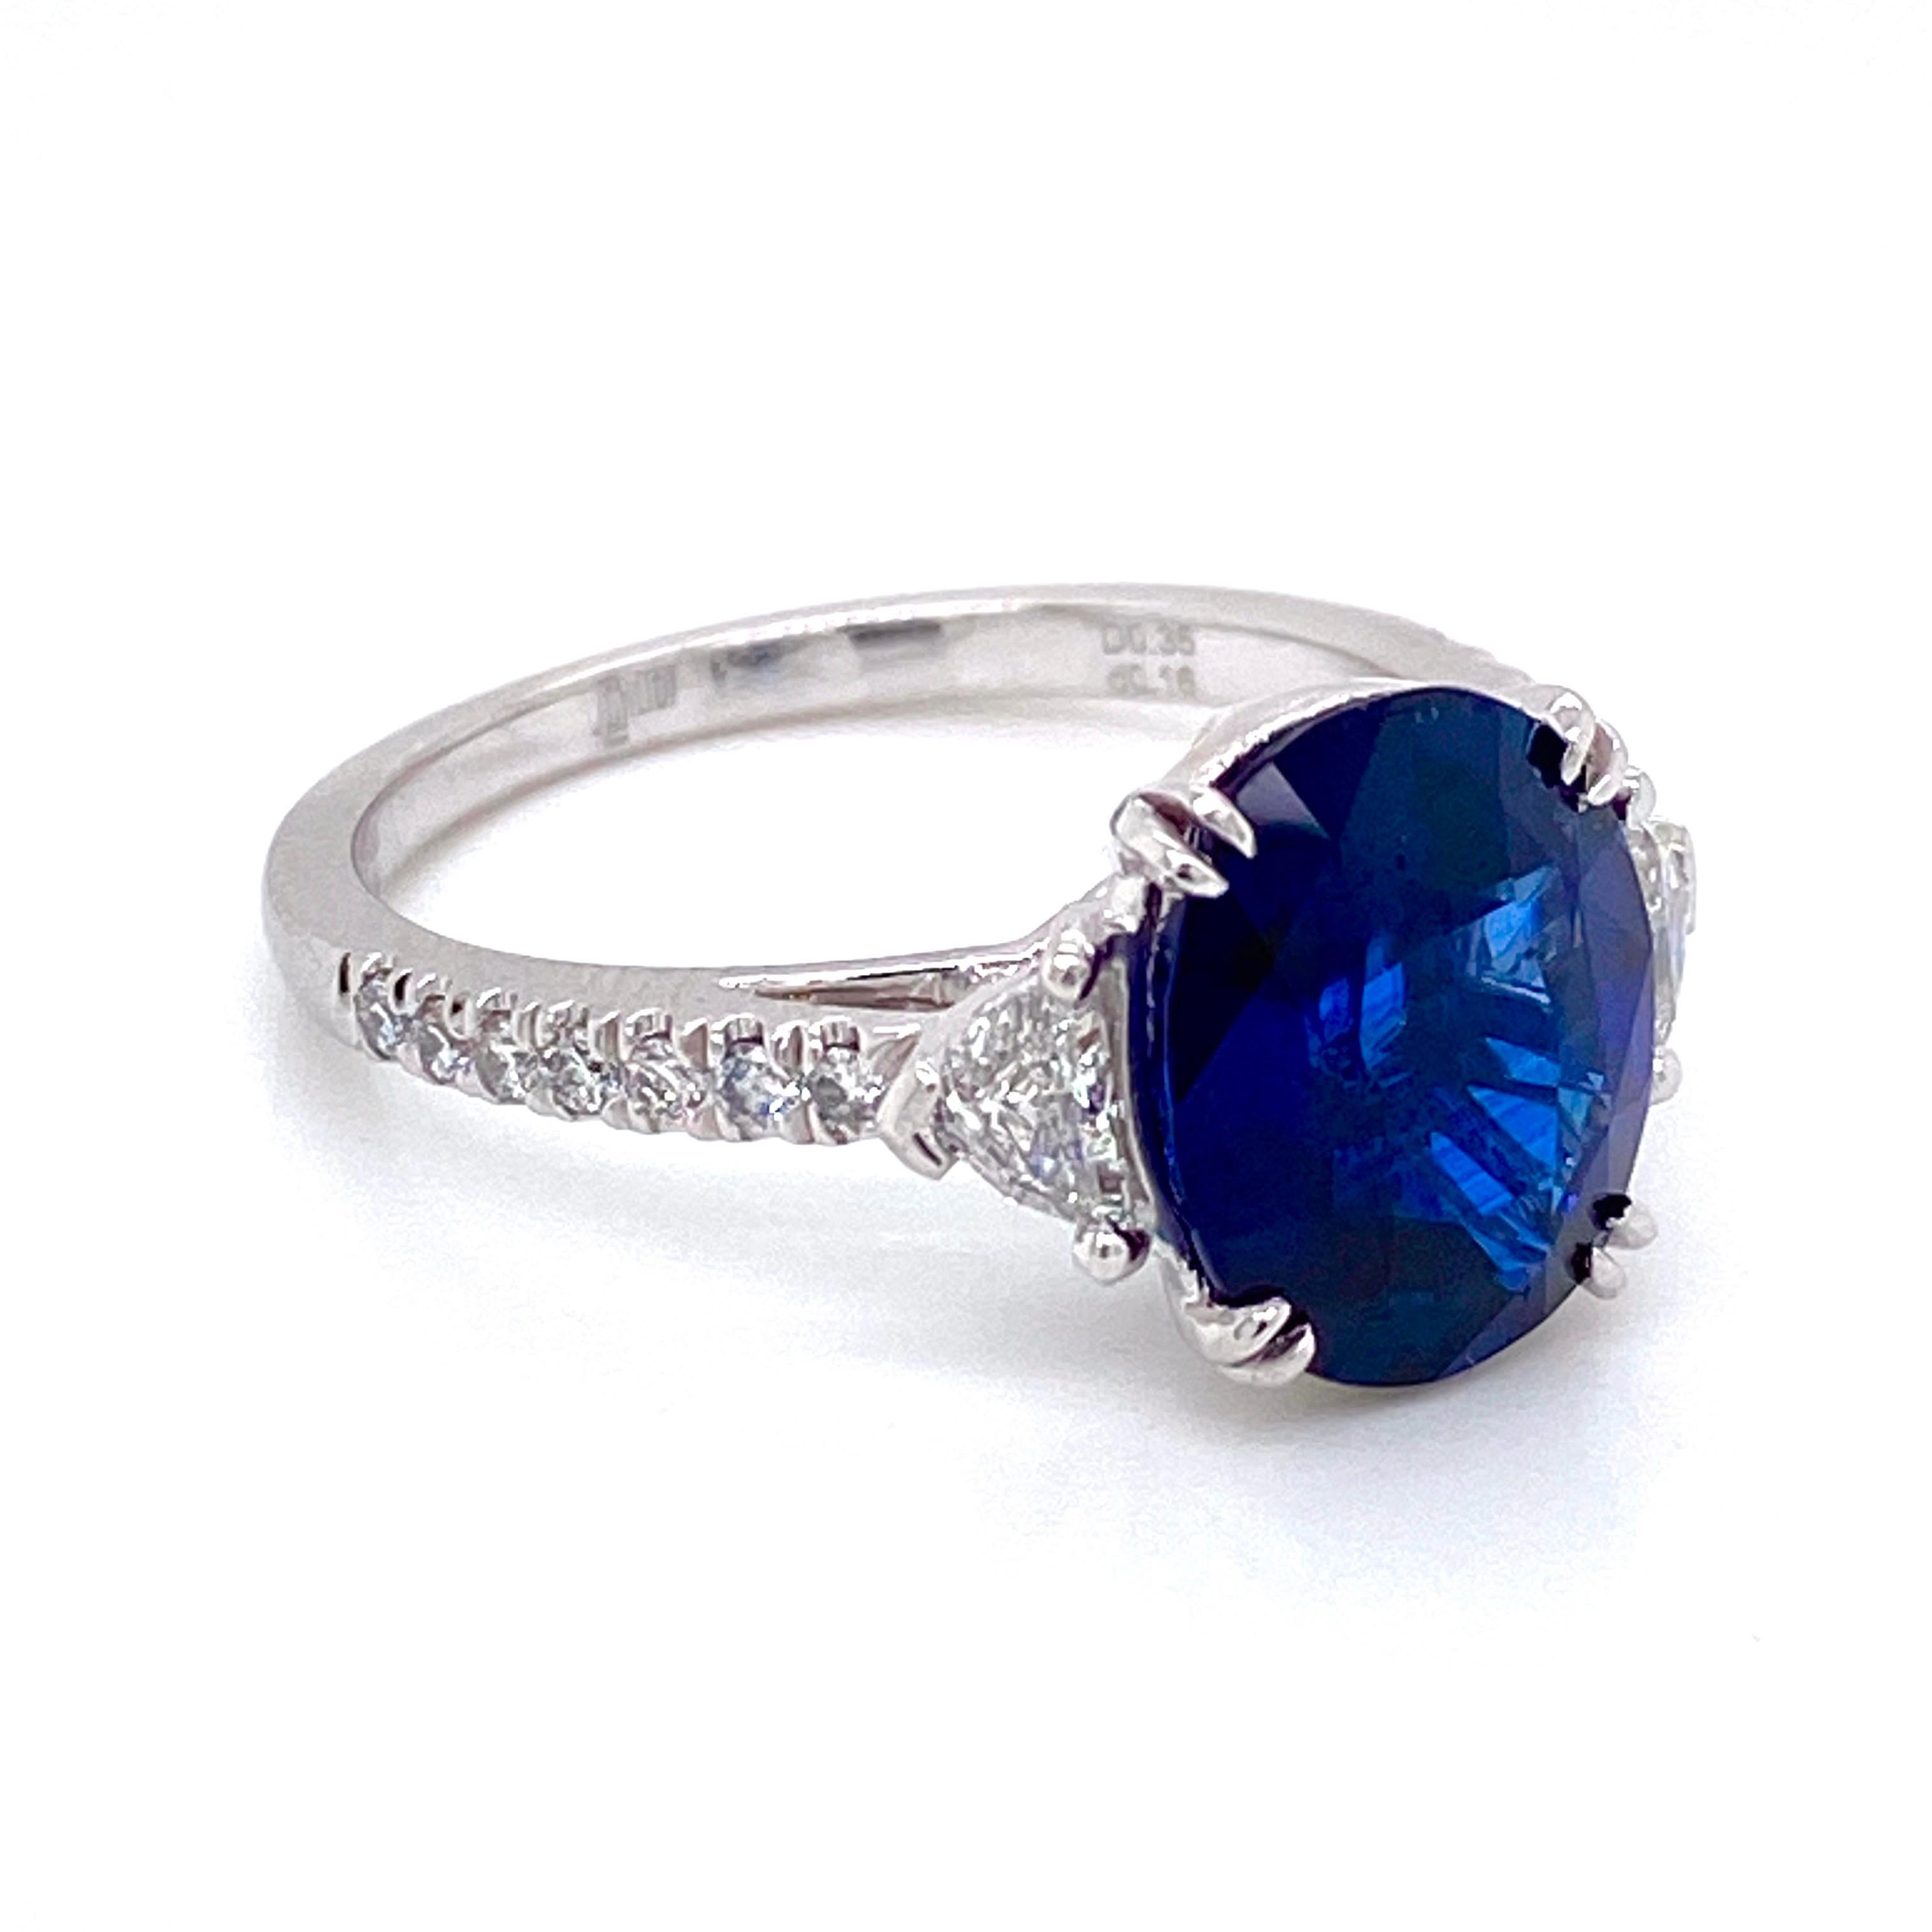 From the Emilio Jewelry Vault, Showcasing a stunning Gia certified 3.84 Carat natural Ceylon sapphire set in the center, with only heat treatment. The mounting was custom made around the center stone in platinum with .35ct epaulettes and .14ct round